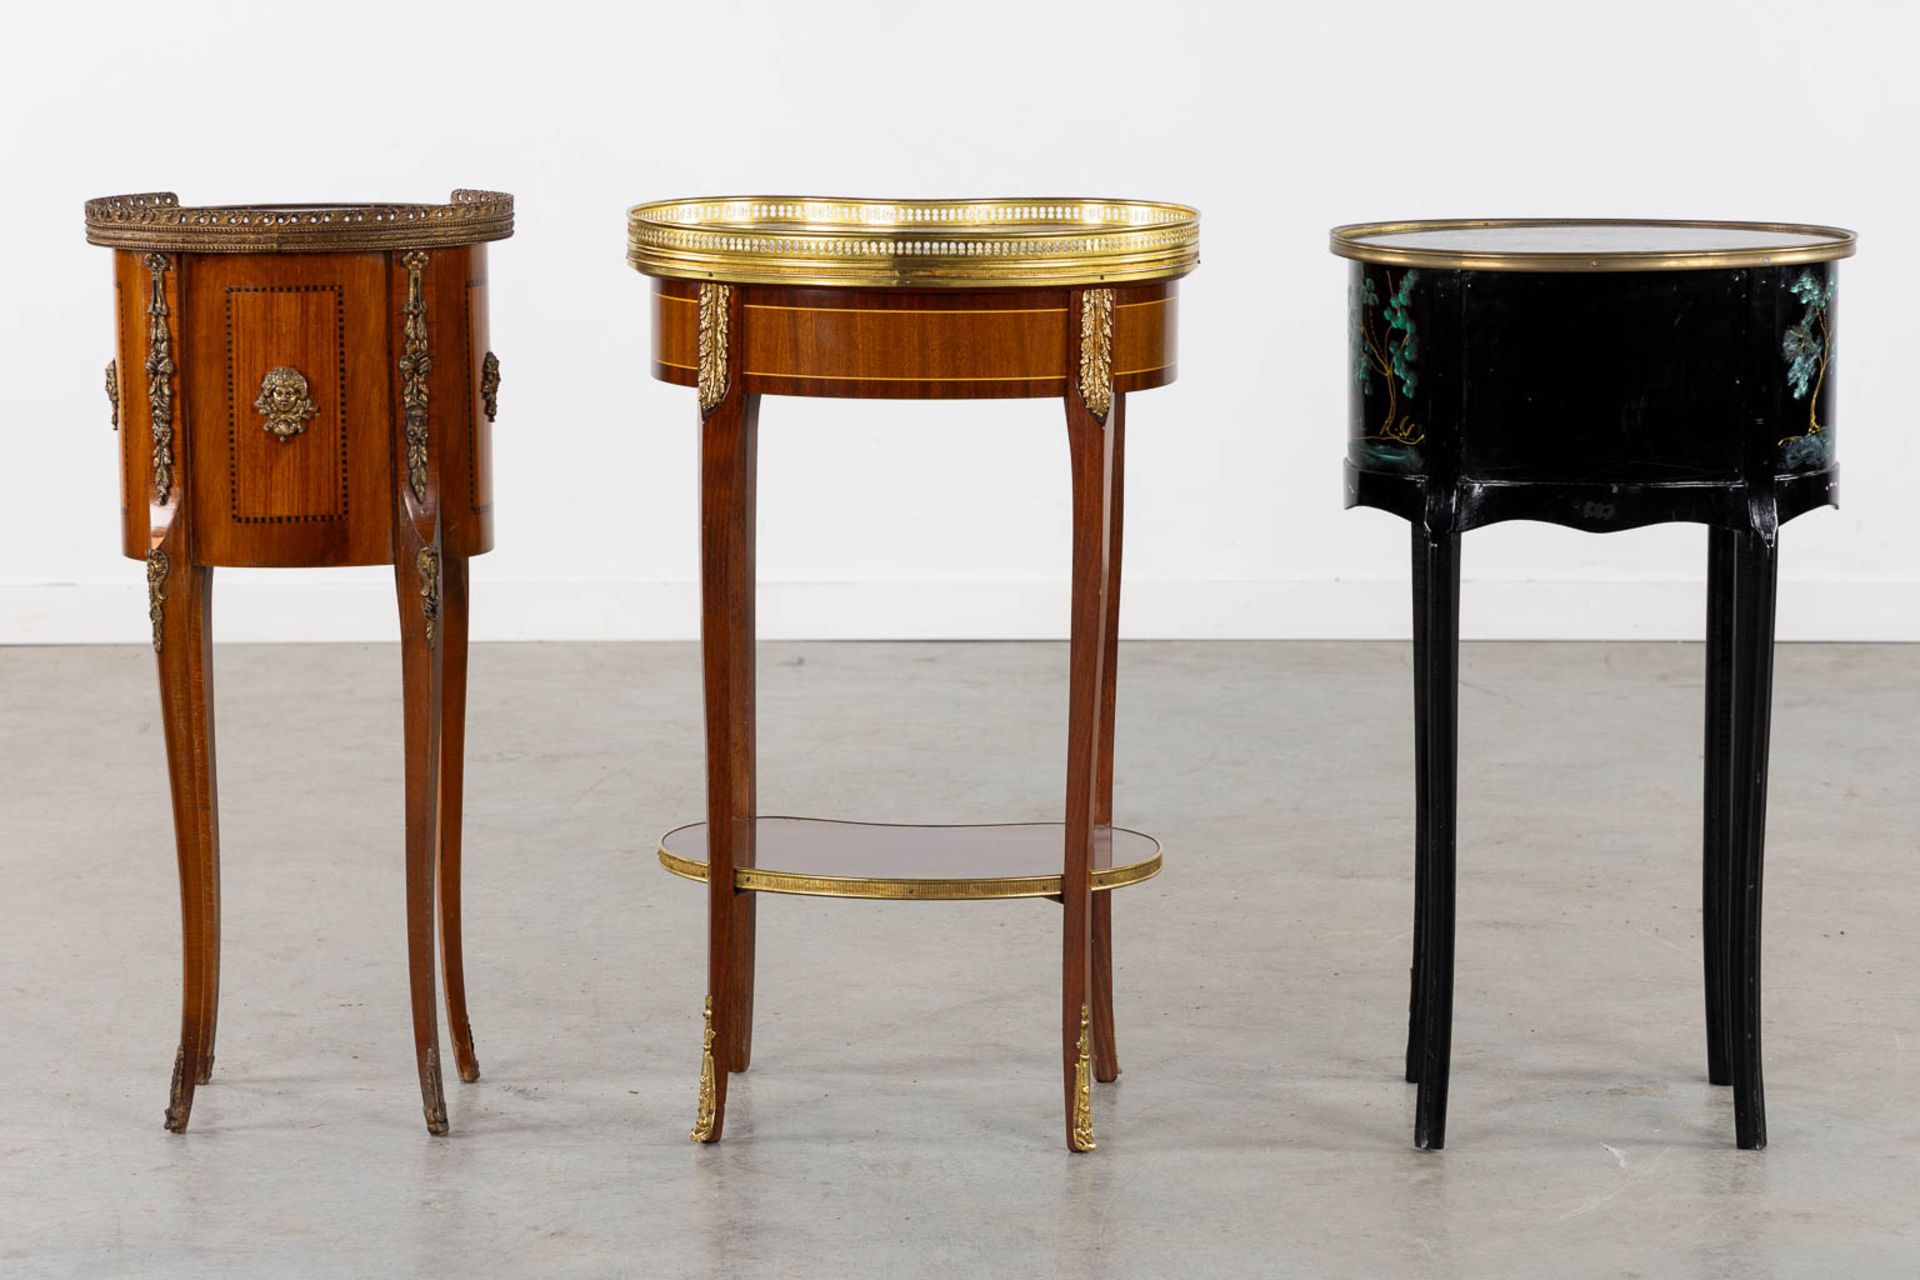 Three small side tables, marquetry and painted decor. 20th C. (L:30 x W:44 x H:71 cm) - Bild 6 aus 14